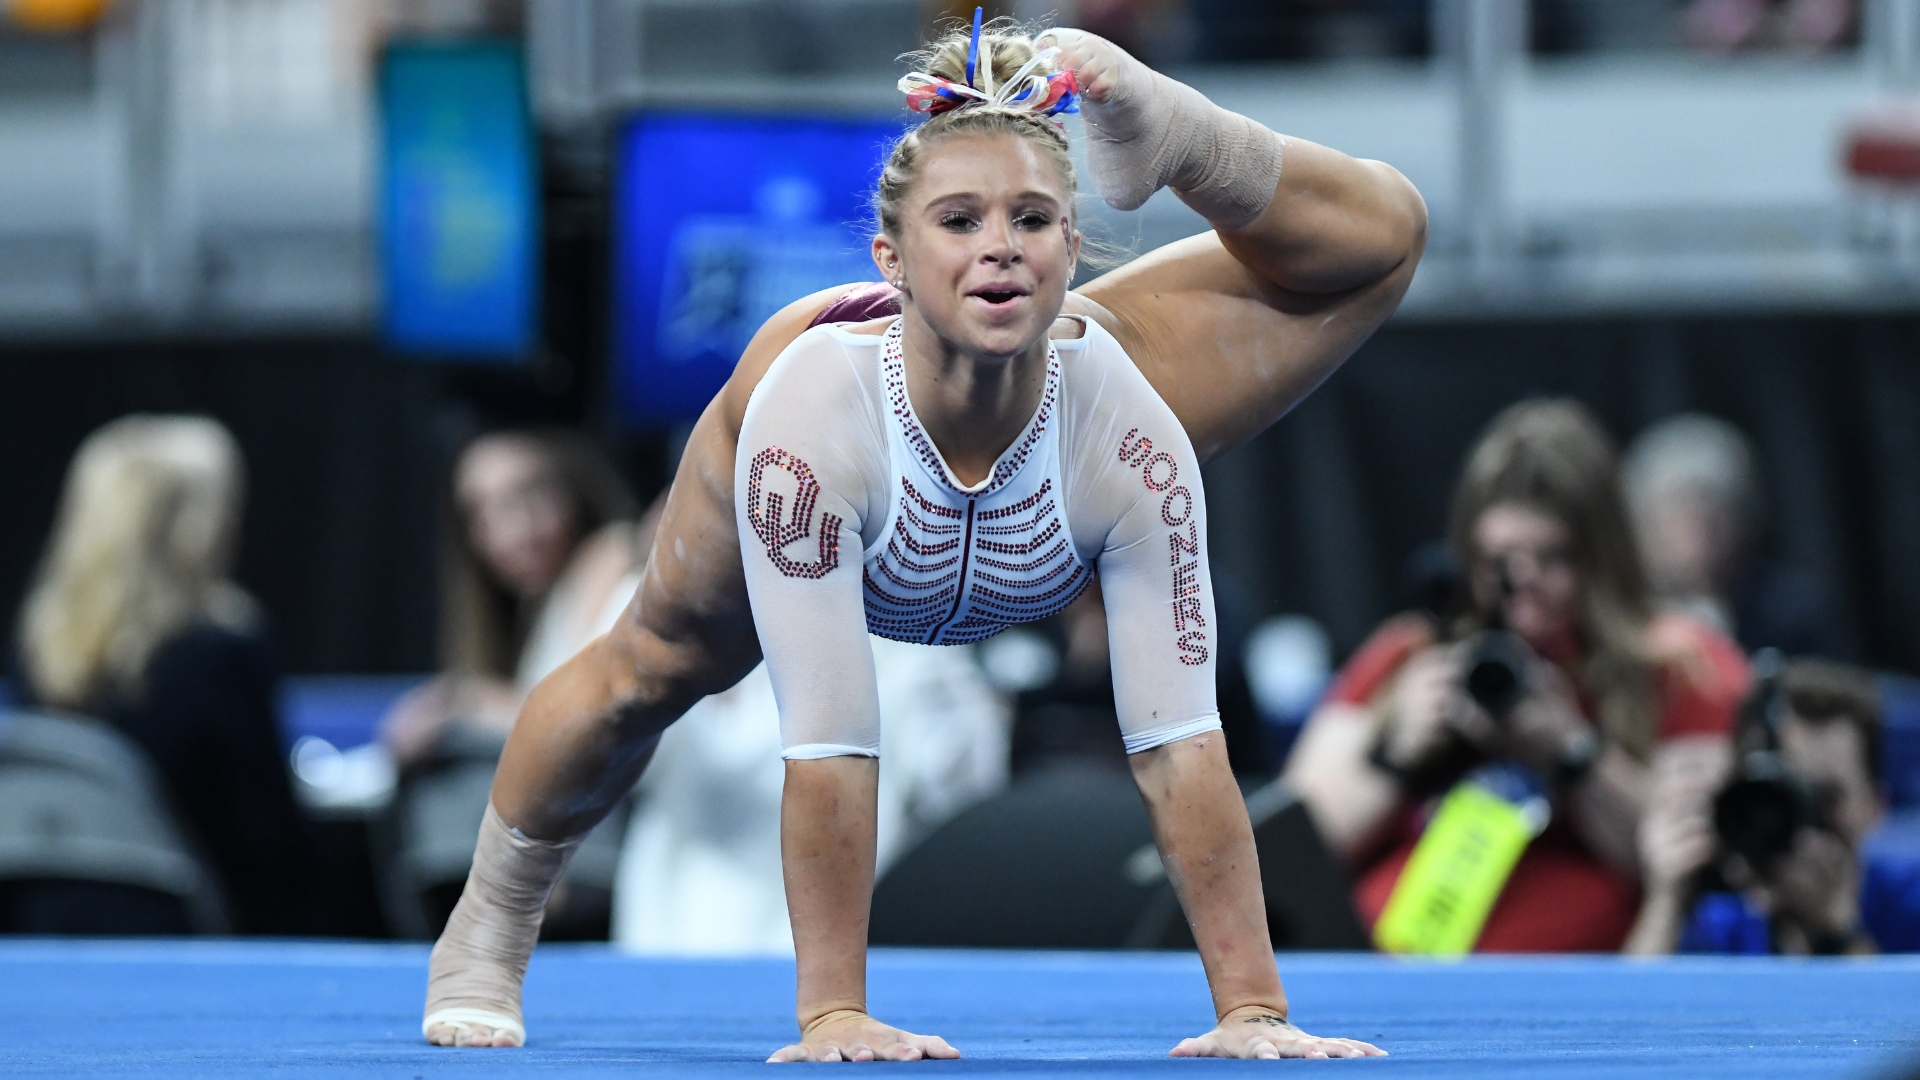 Oklahoma's Ragan Smith competes on floor during the semifinals of the 2022 NCAA Women's Gymnastics Championships.